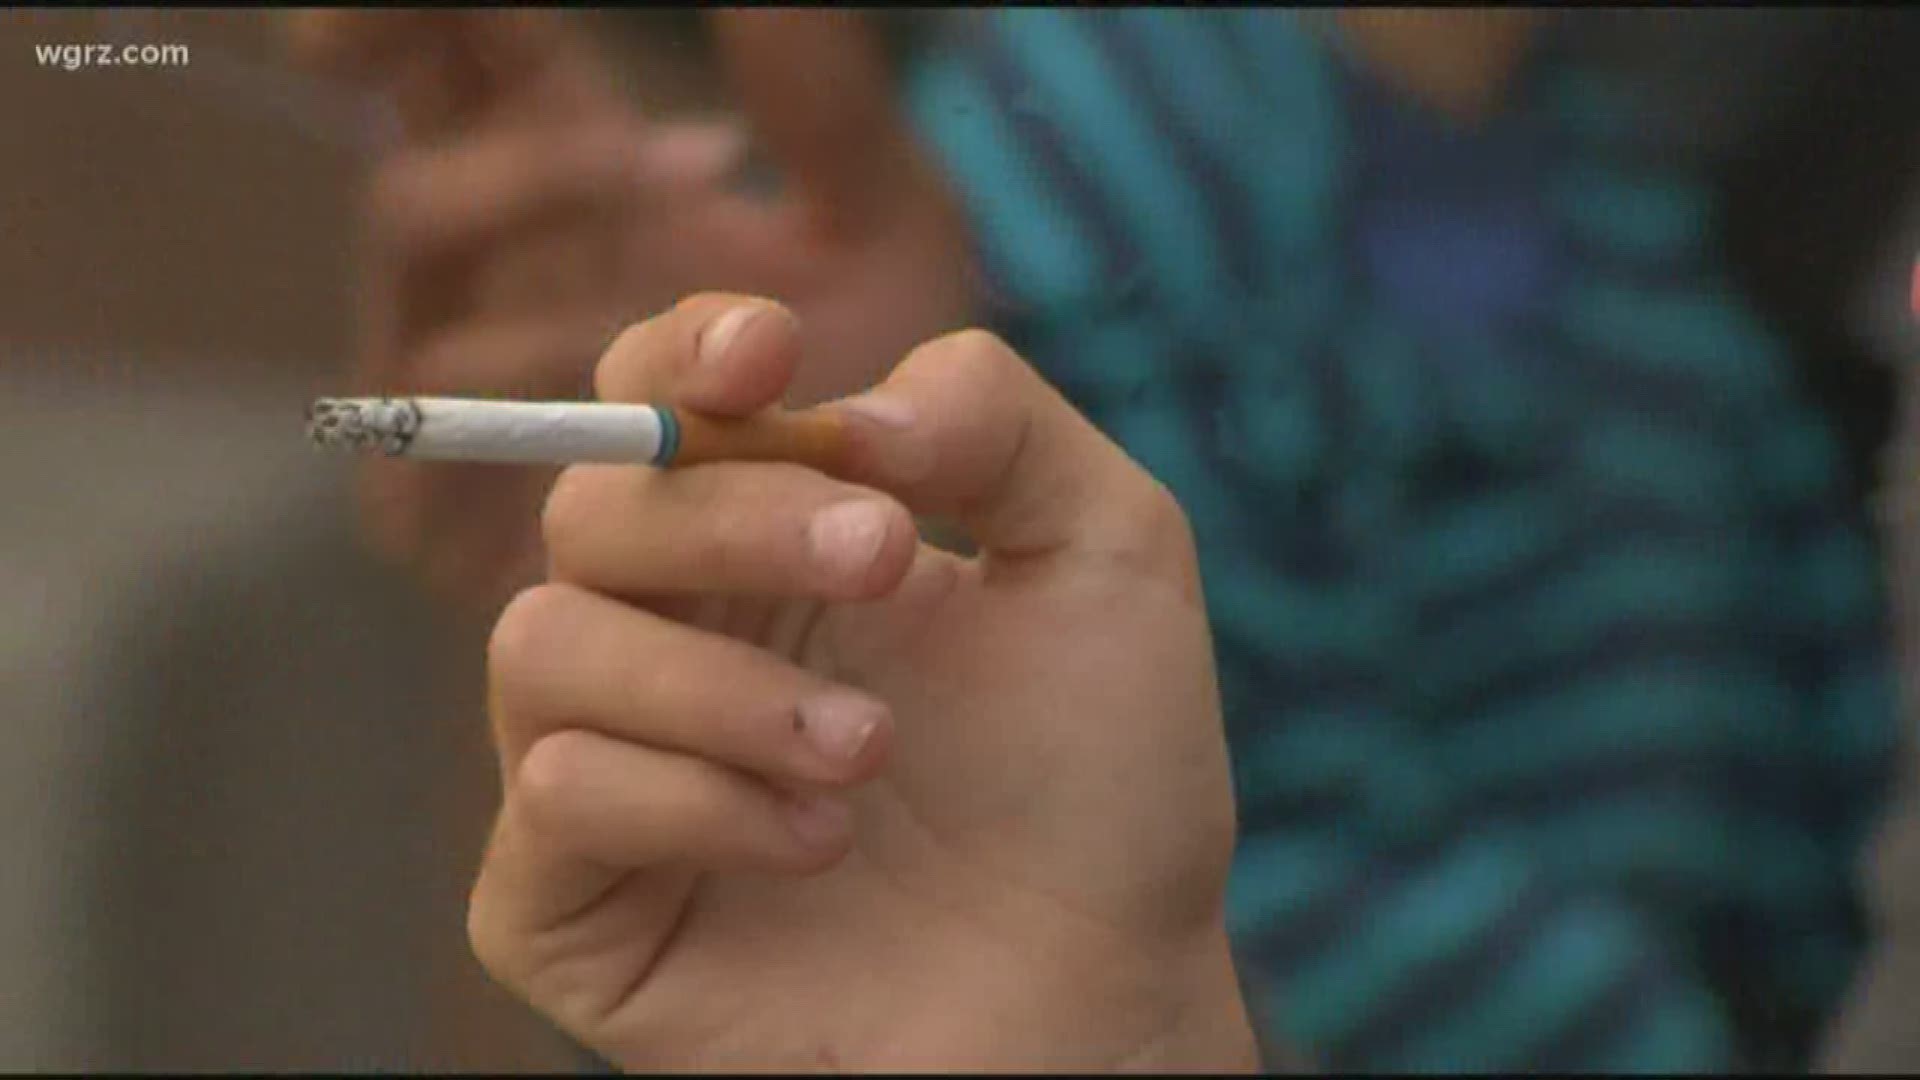 You now have to be at least 21 years old to buy tobacco products in New York State.